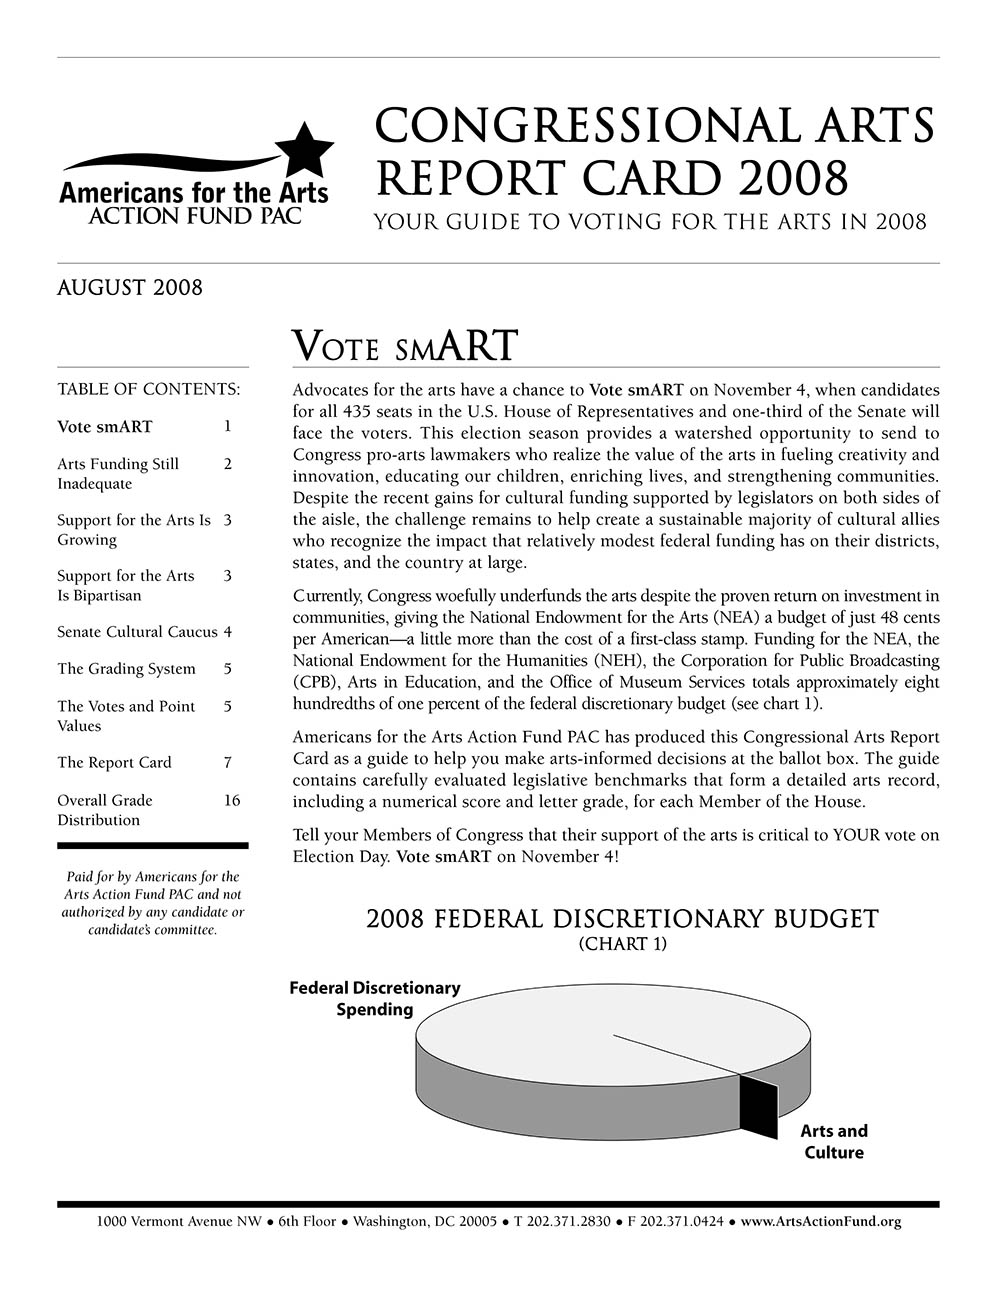 Cover of 2008 Congressional Arts Report Card